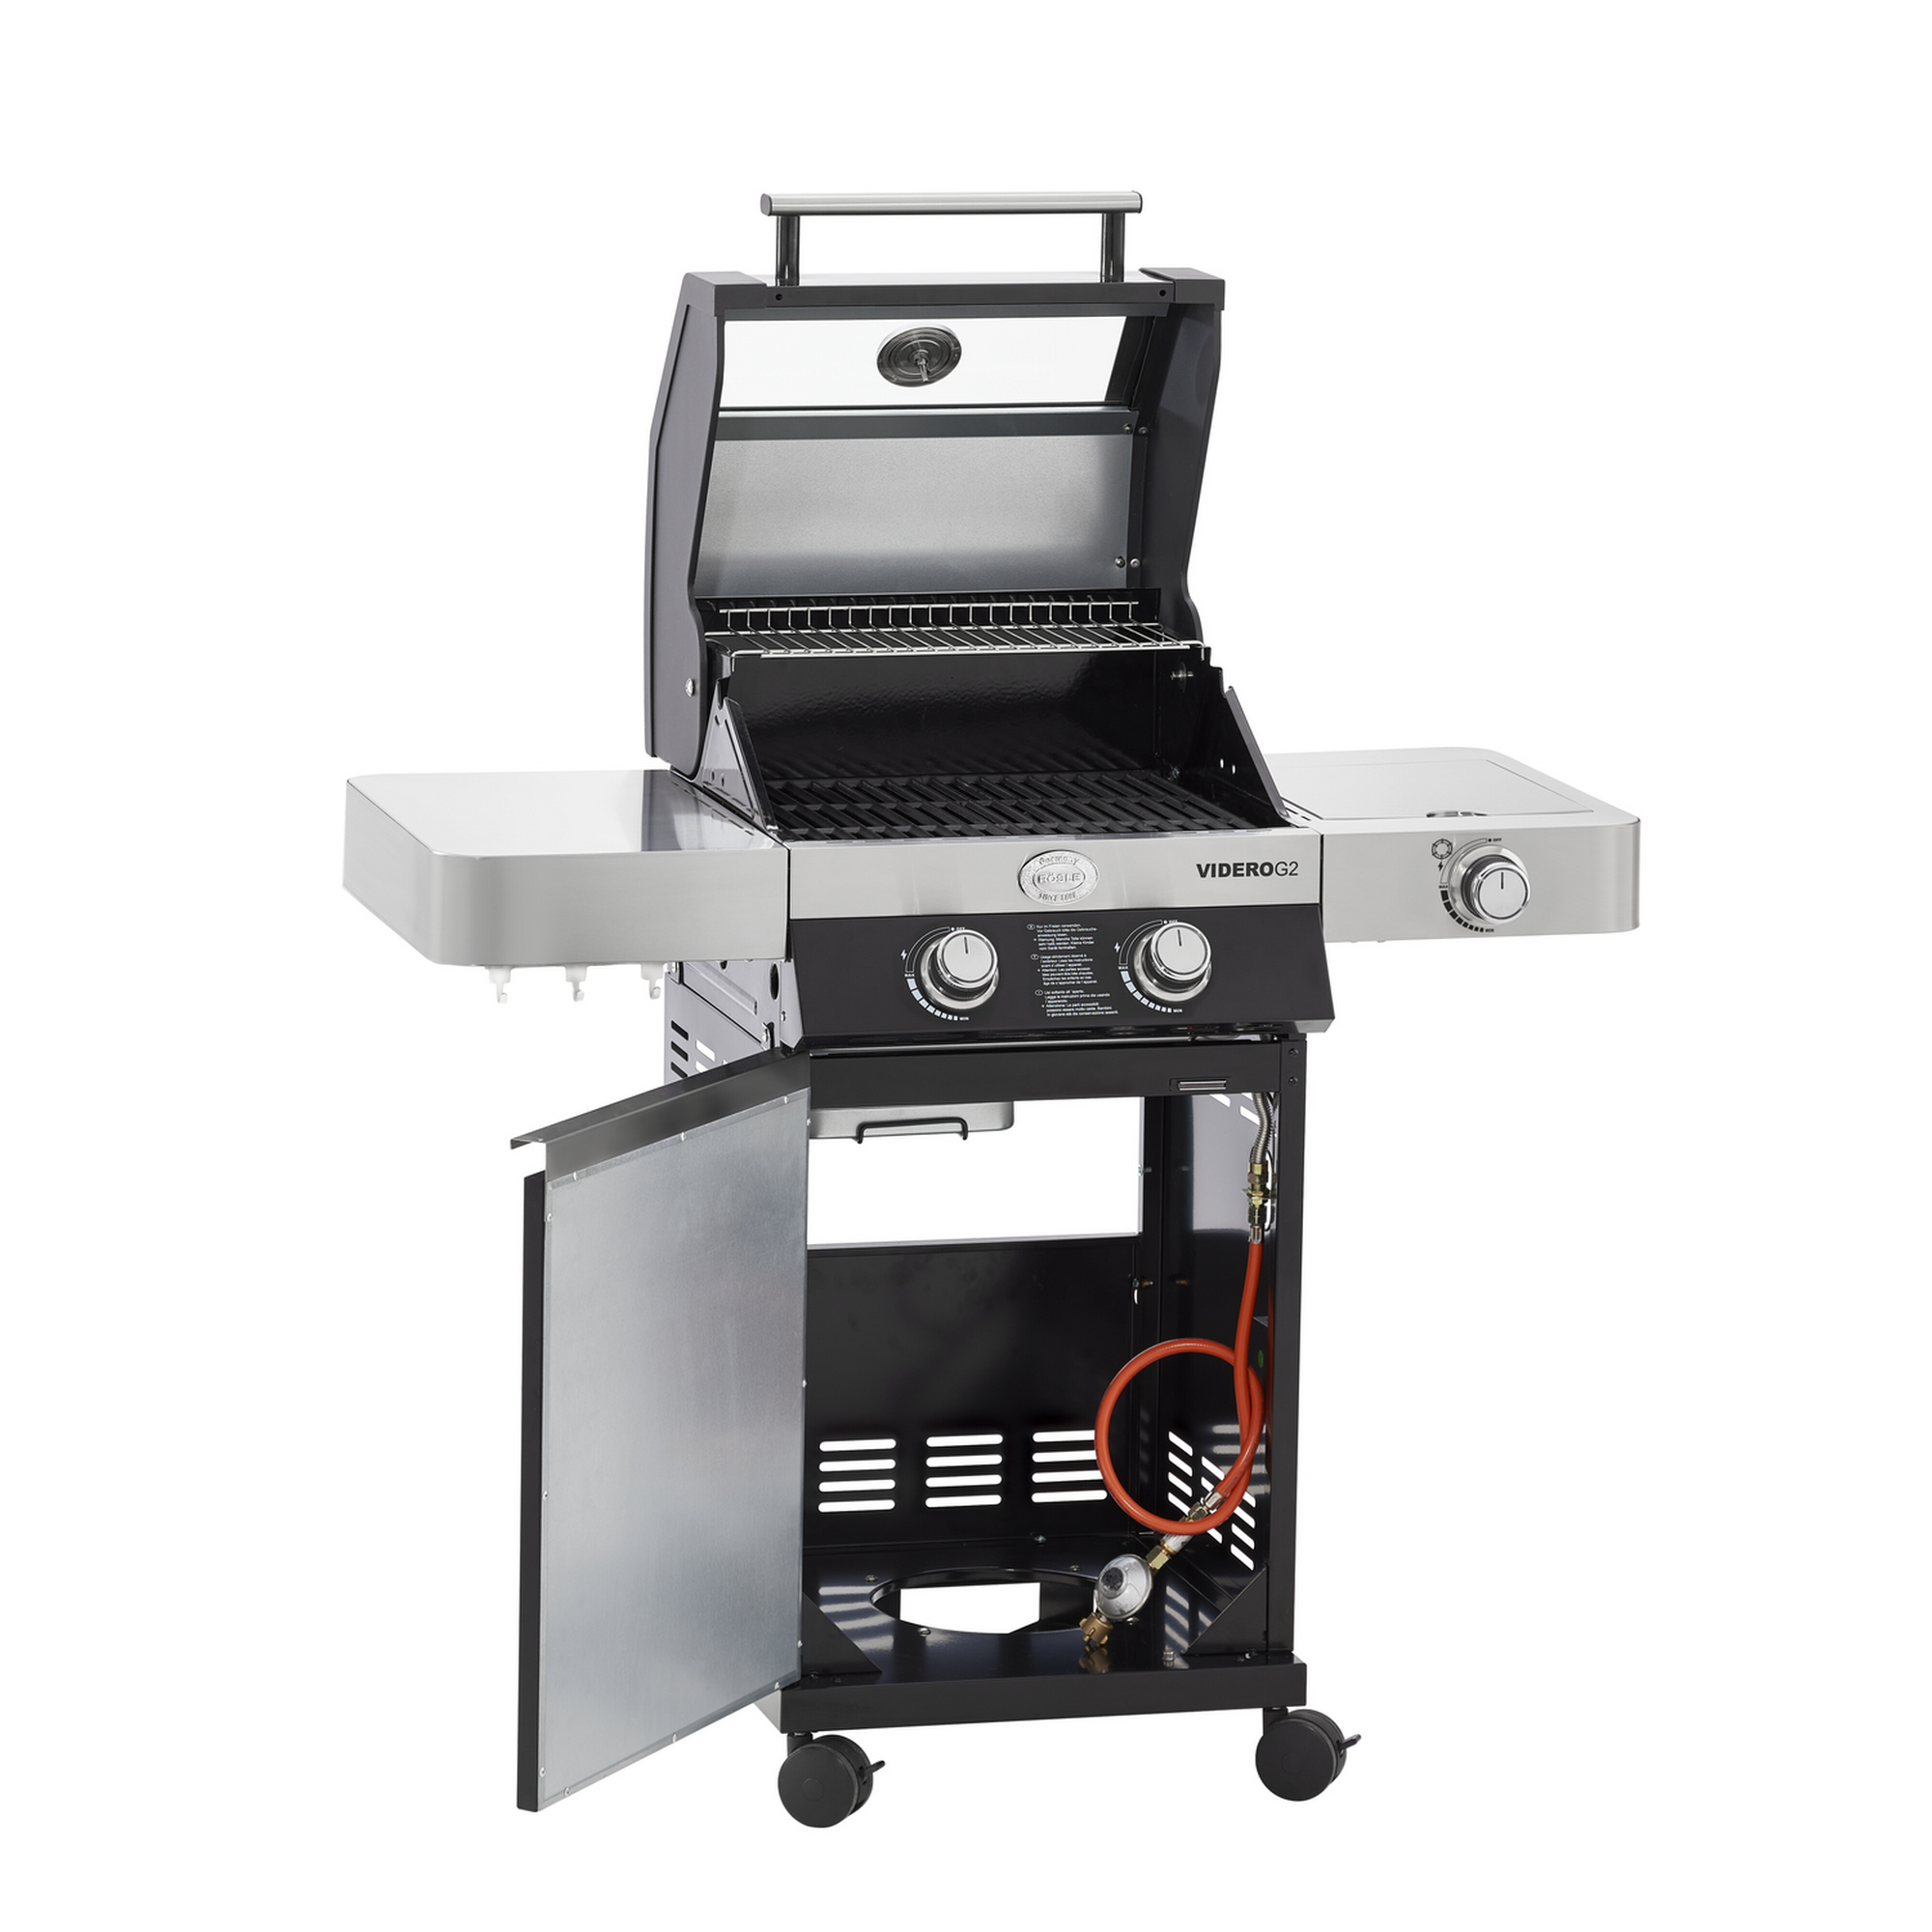 Gasgrill 'BBQ-Station Videro G2' schwarz + product picture